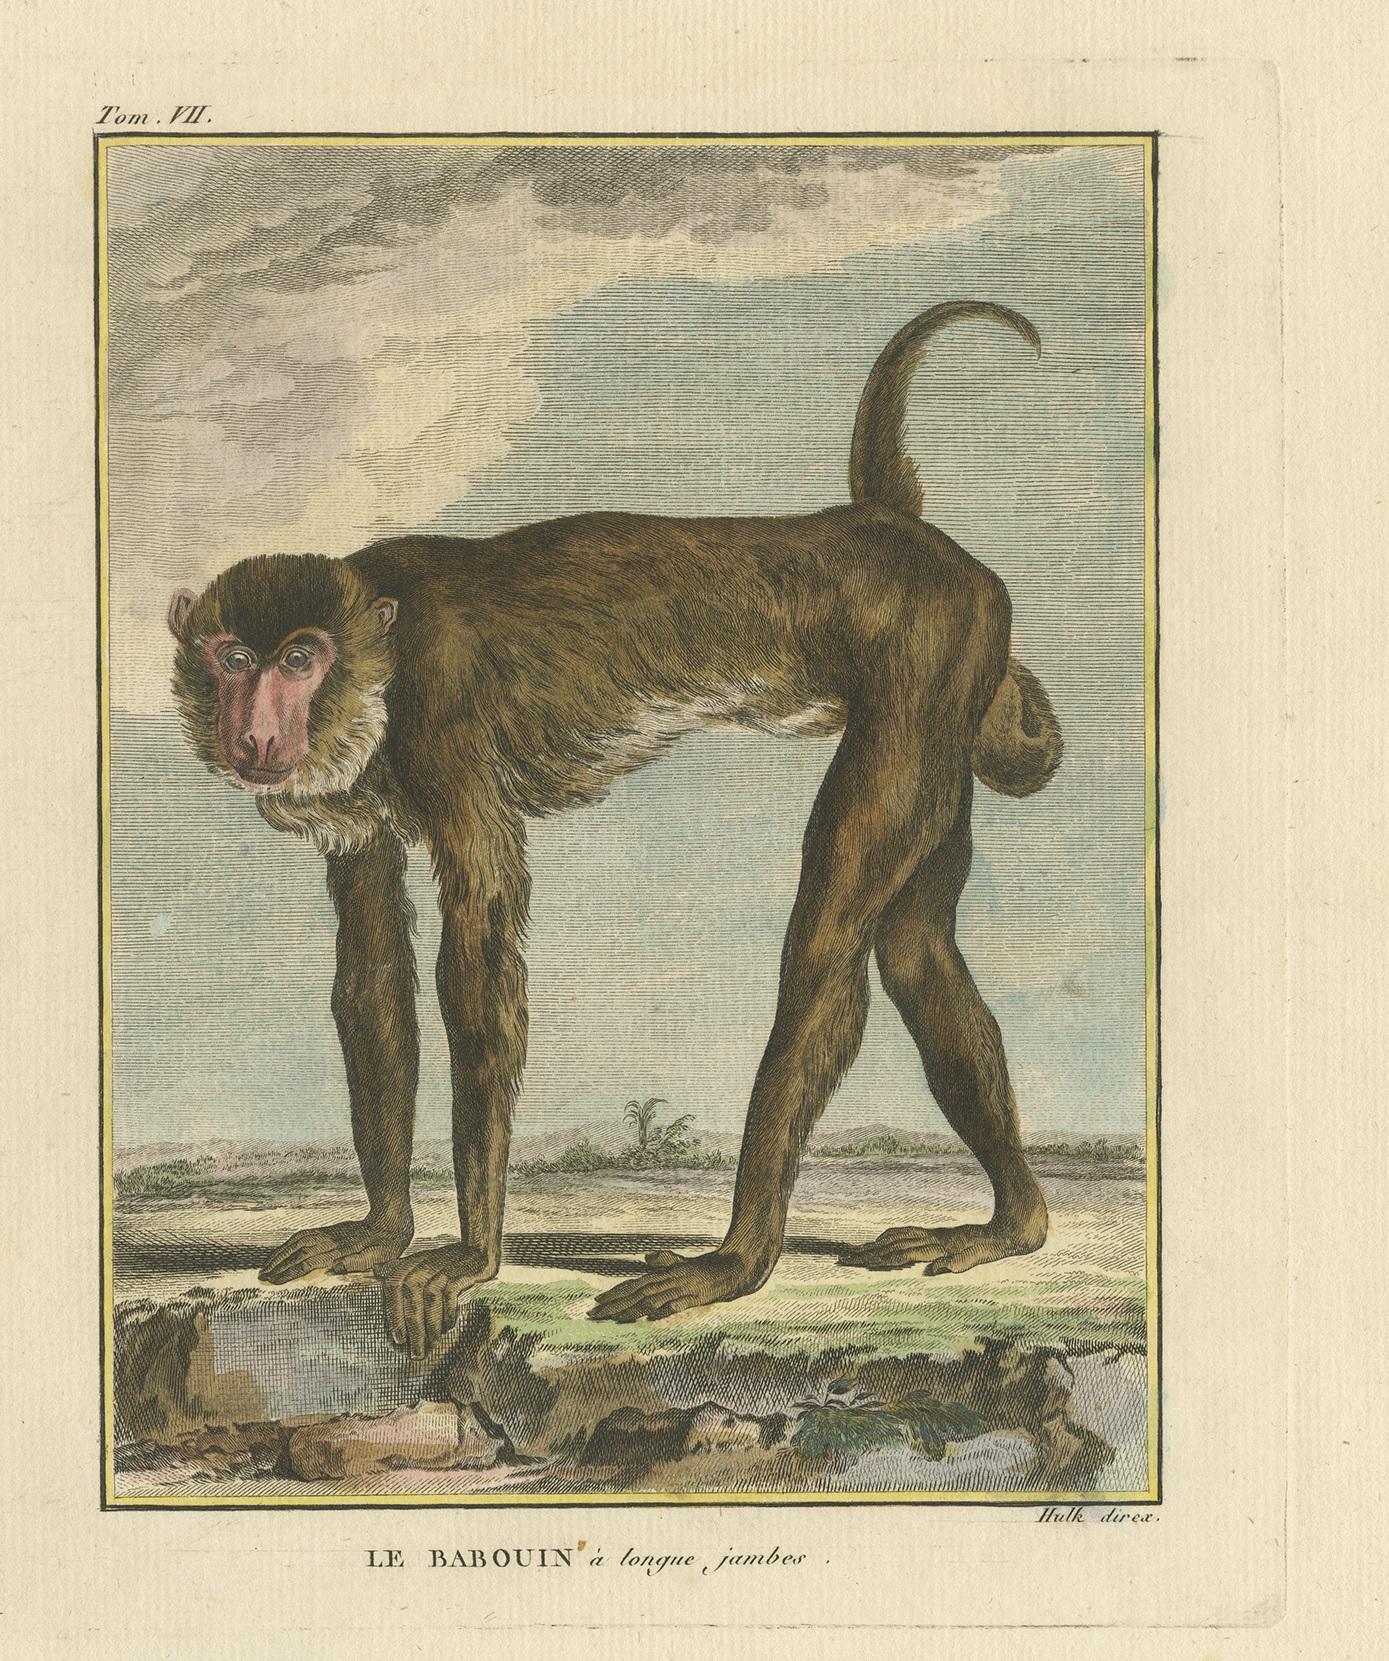 Antique print titled 'Le Babouin à longue jambes'. Hand colored engraving of a baboon, most likely originating from an edition of Buffon's 'Histoire Naturelle'.